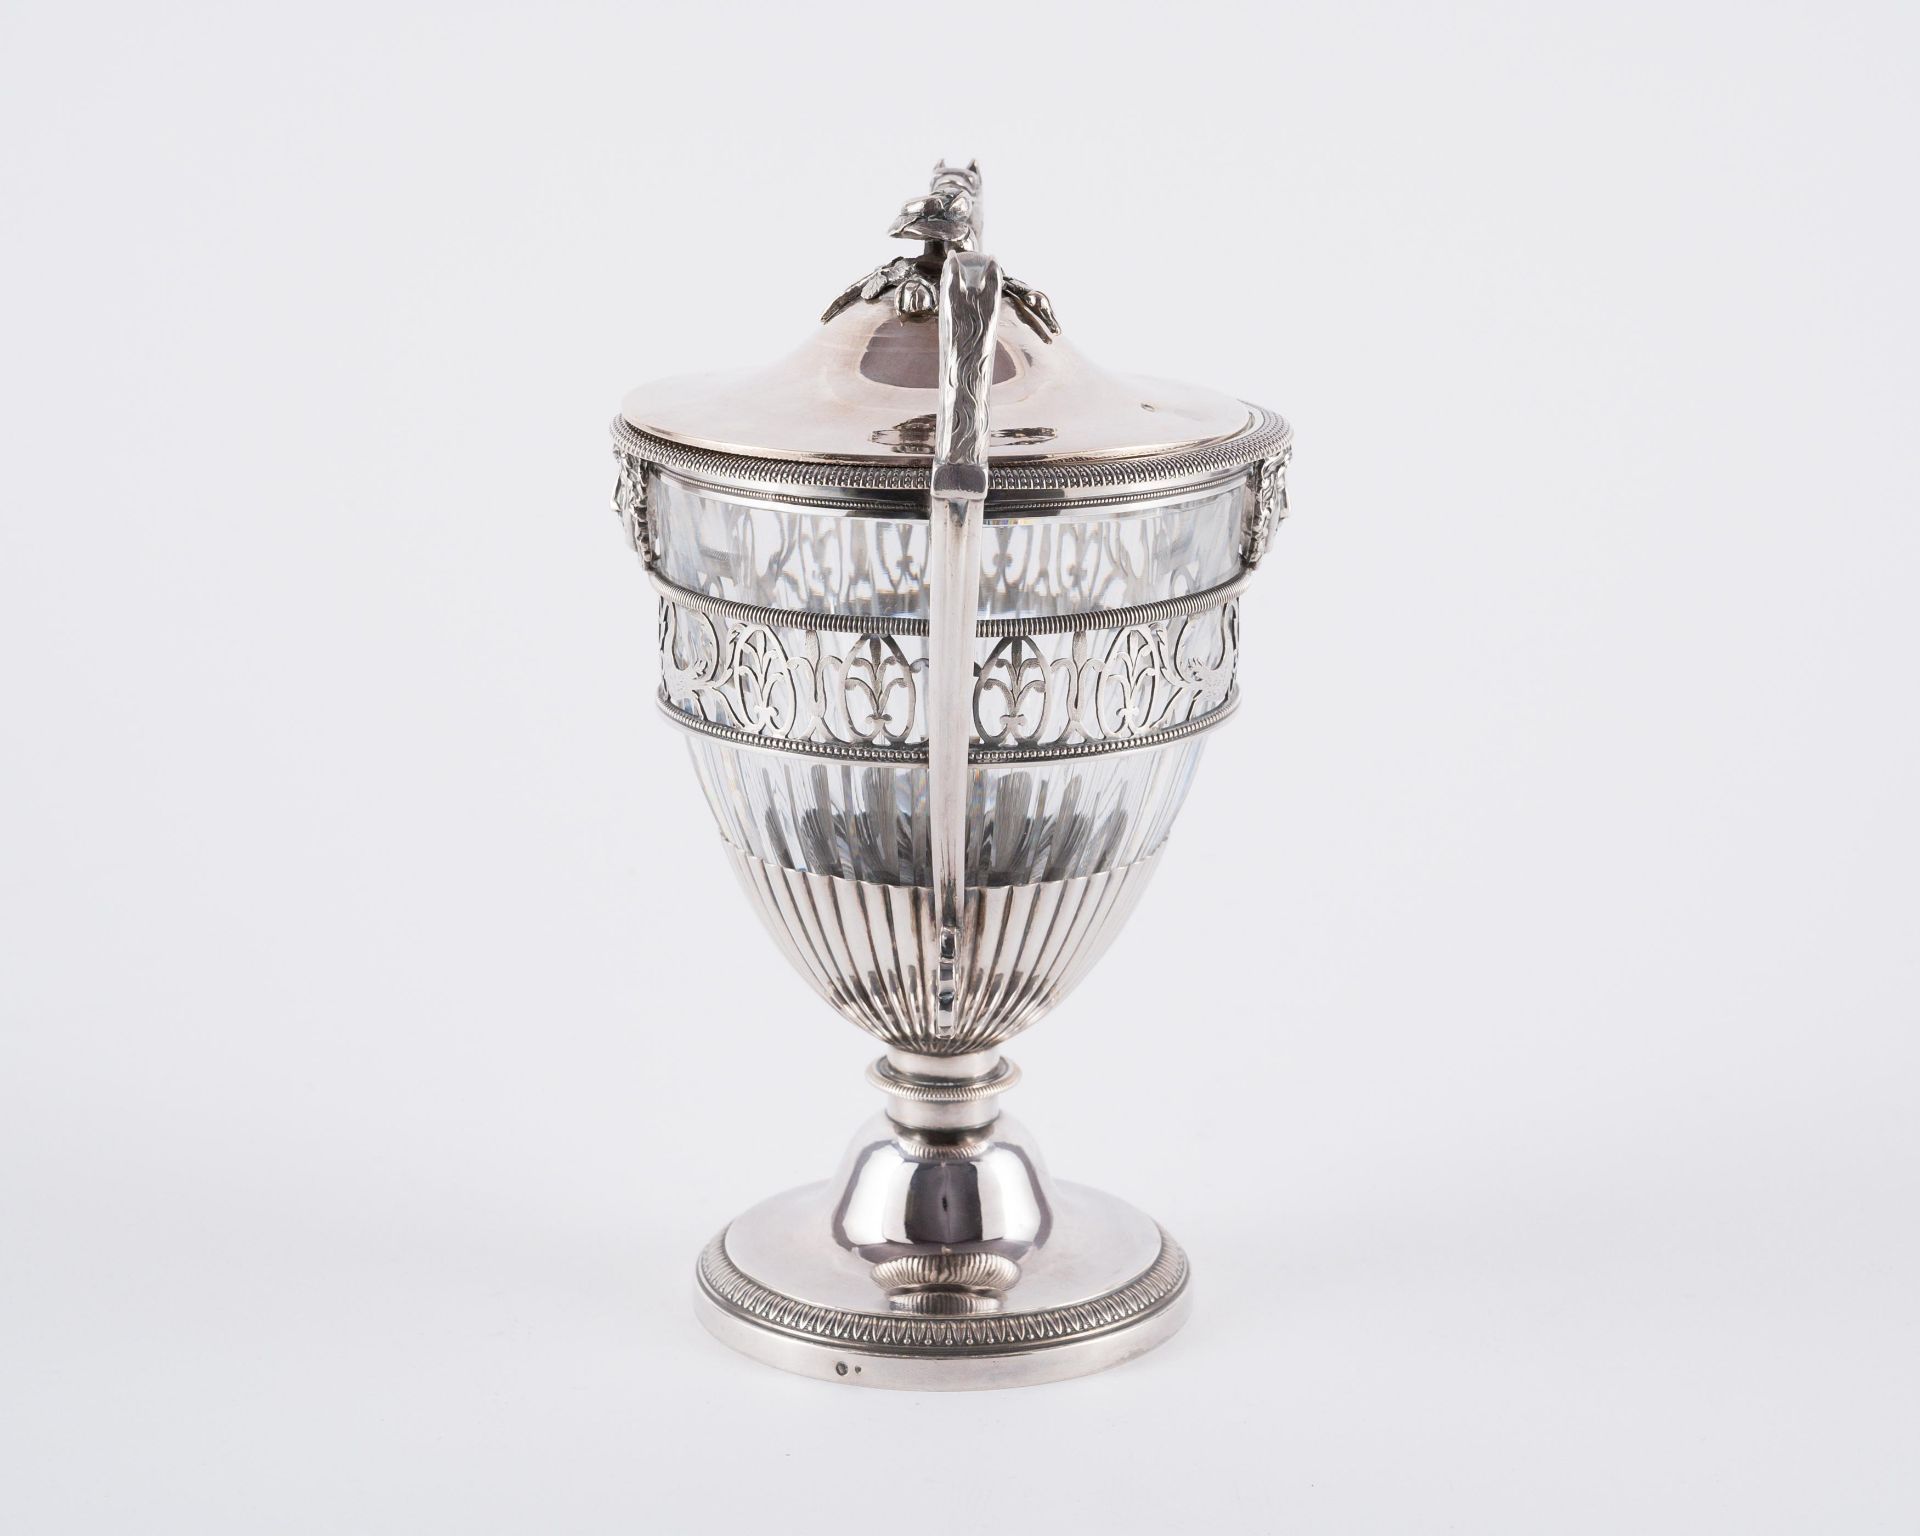 Nicolas-Richard Masson: FOOTED-SILVER SUGAR VESSEL WITH MASCARONS - Image 2 of 6